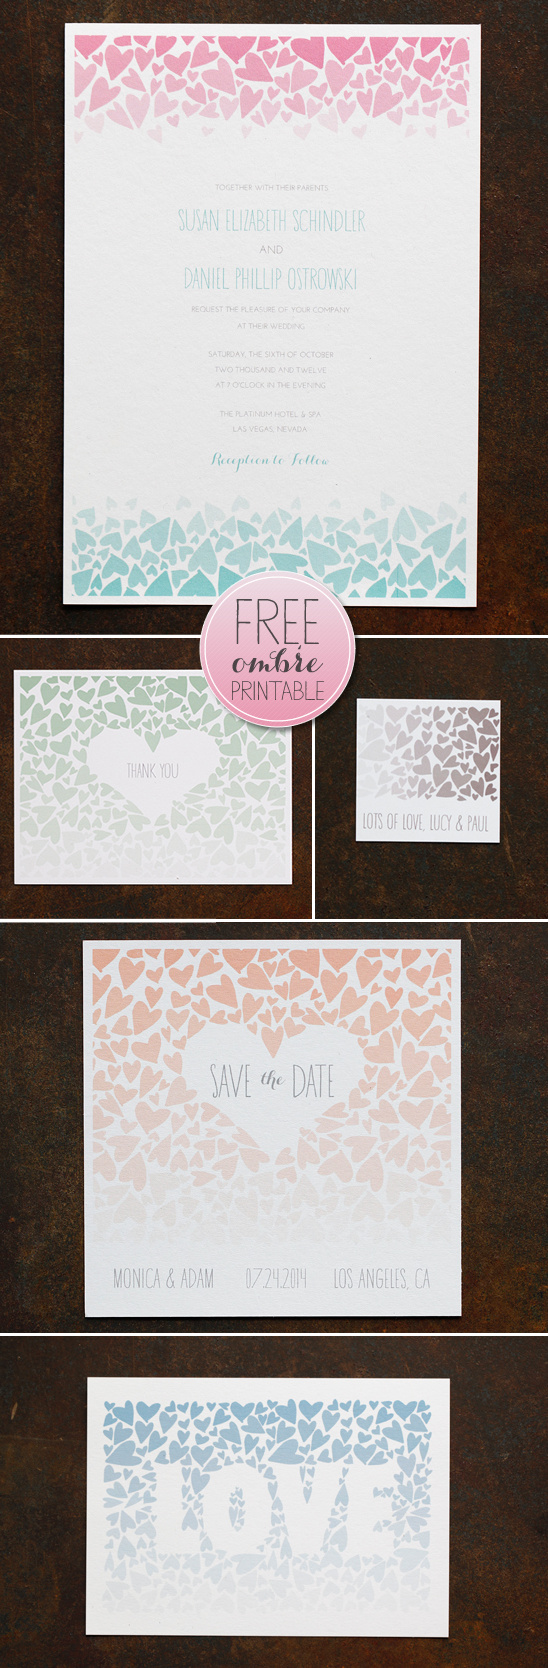 Free Ombre Printables